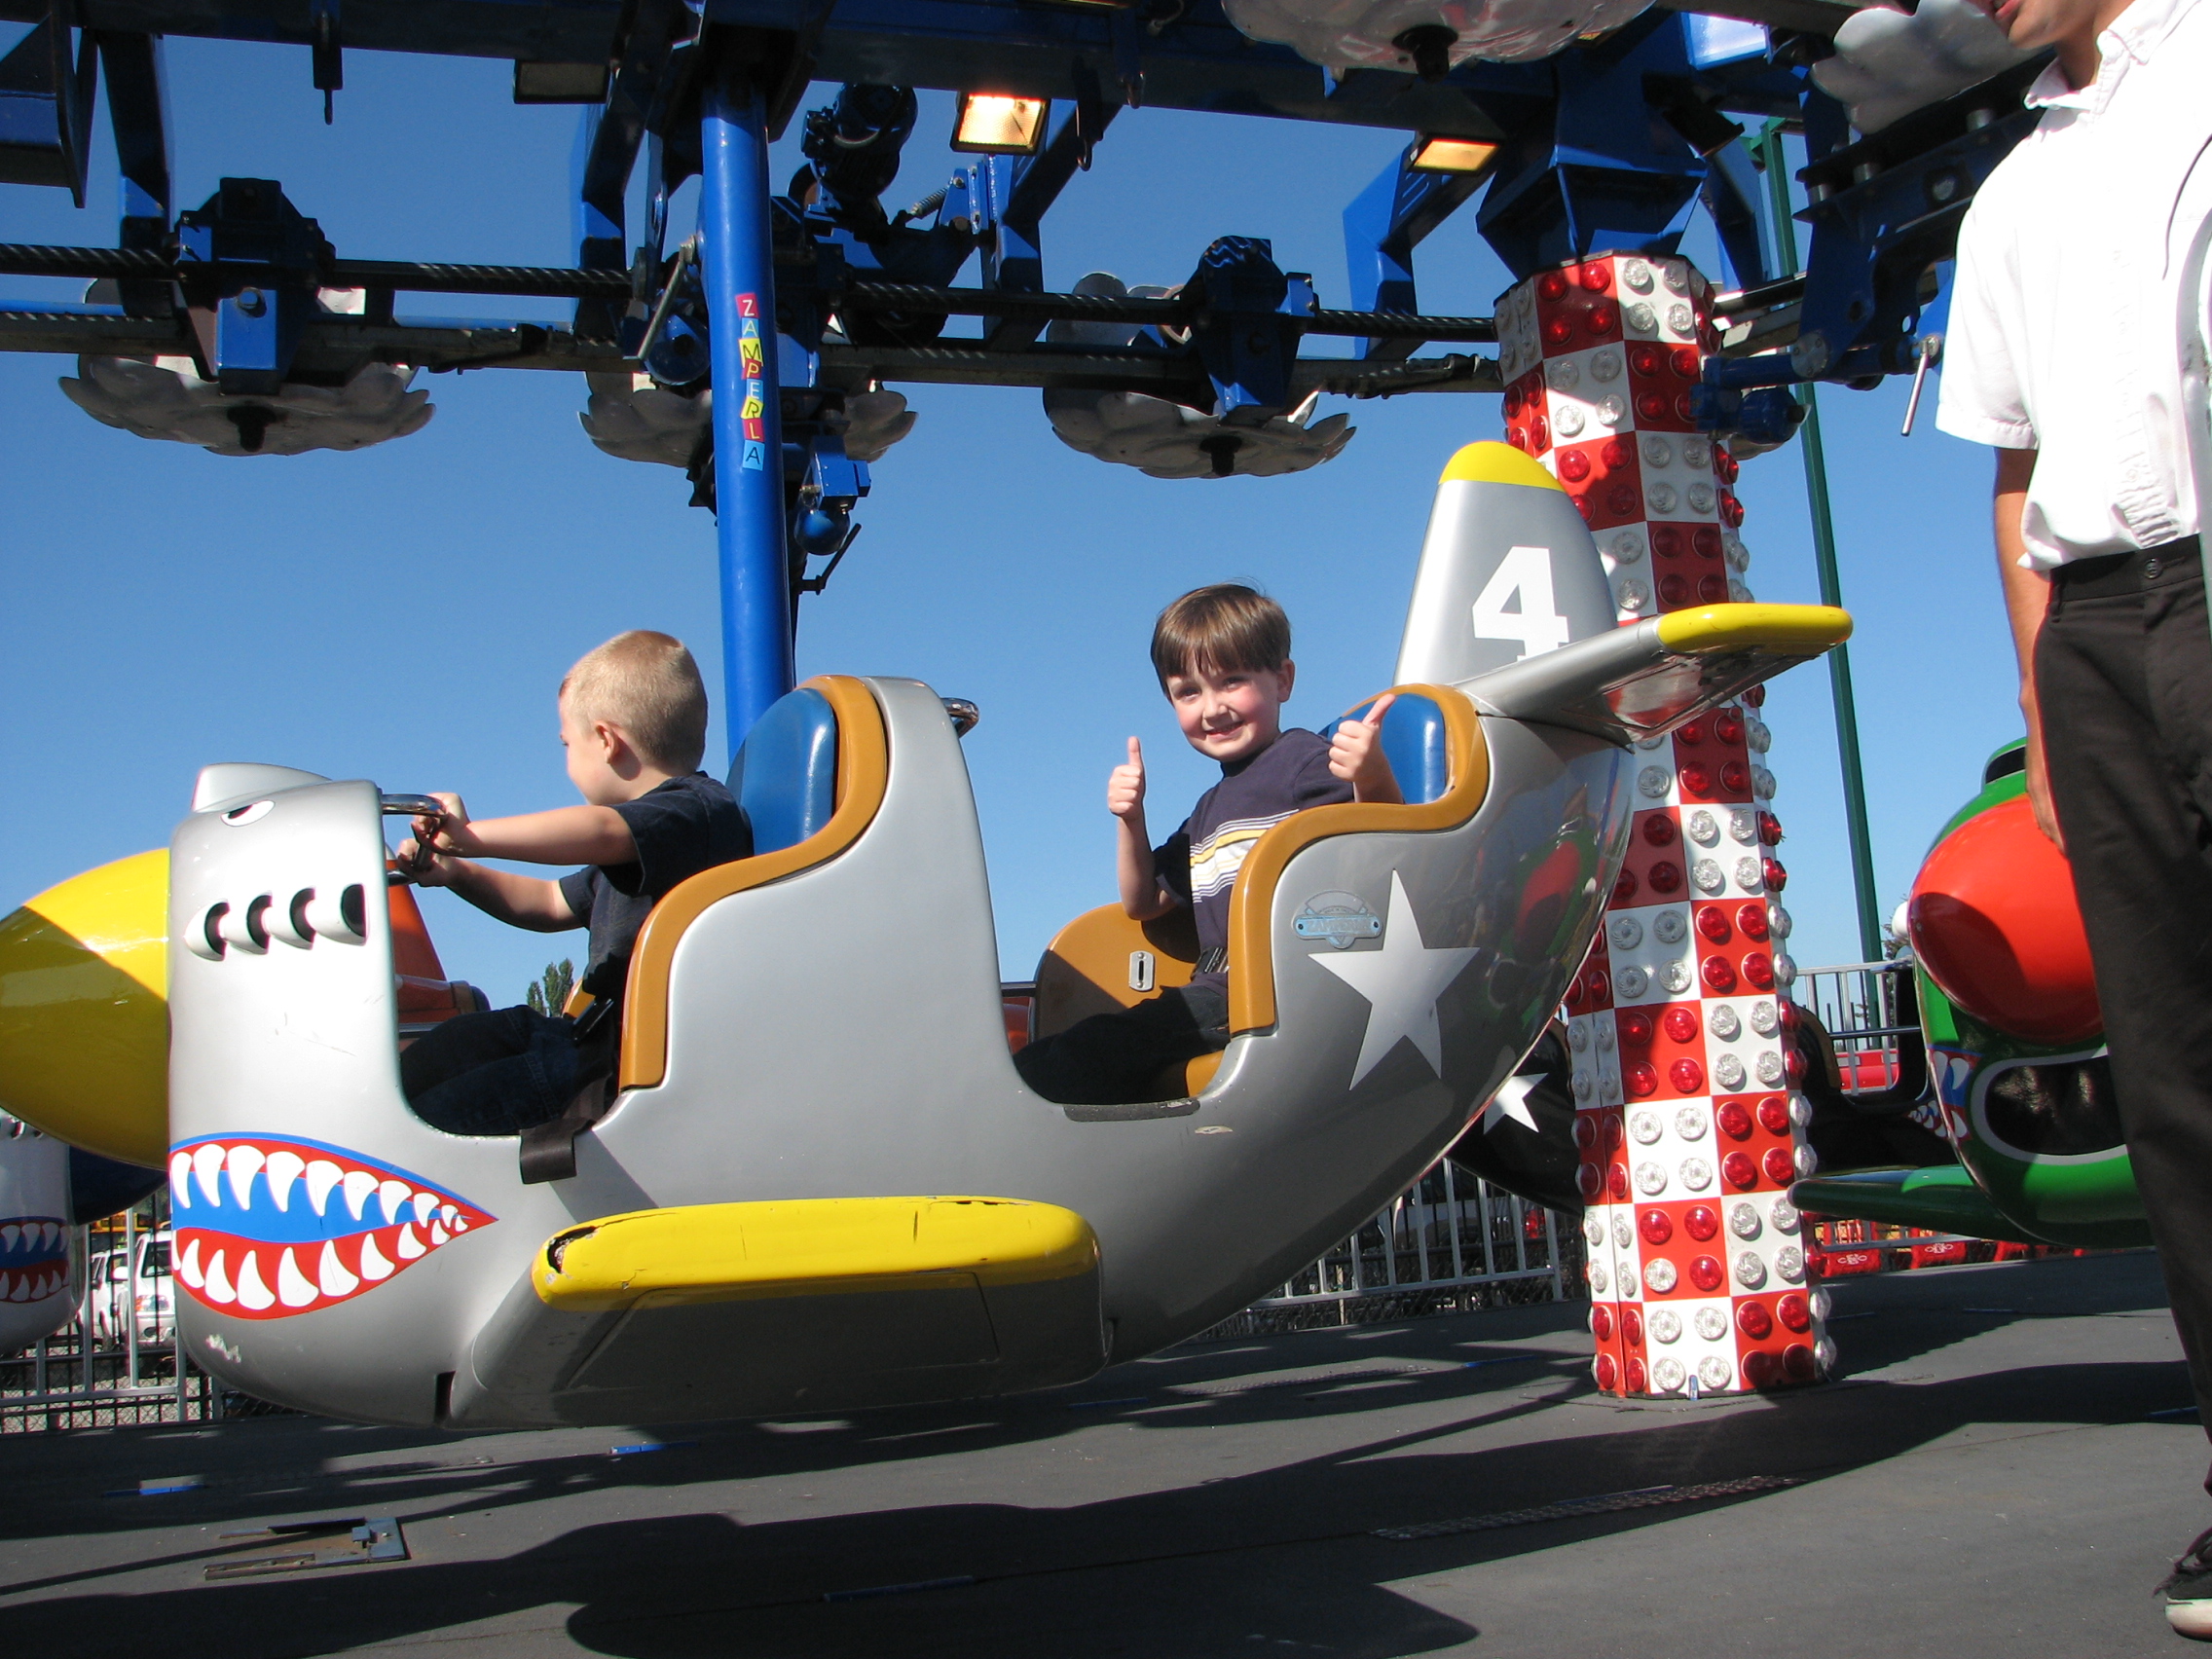 A four year old gives two thumbs up from the backseat of a kiddie carnival jet plane ride.